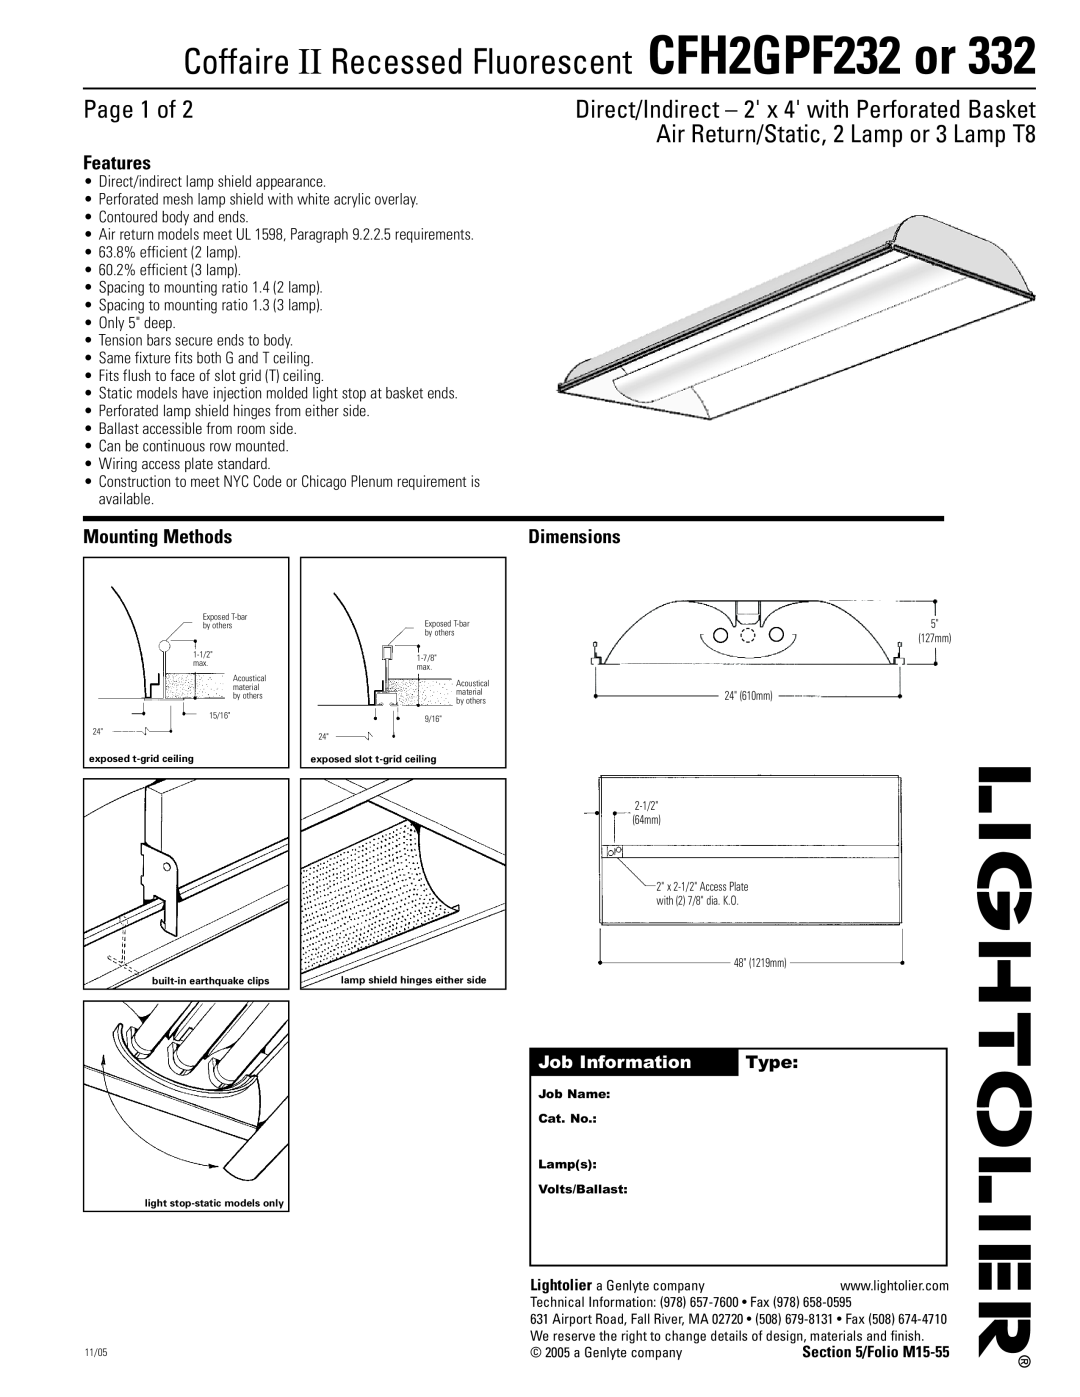 Lightolier dimensions Coffaire II Recessed Fluorescent CFH2GPF232 or, Page 1 of, Features, Mounting Methods, Type 